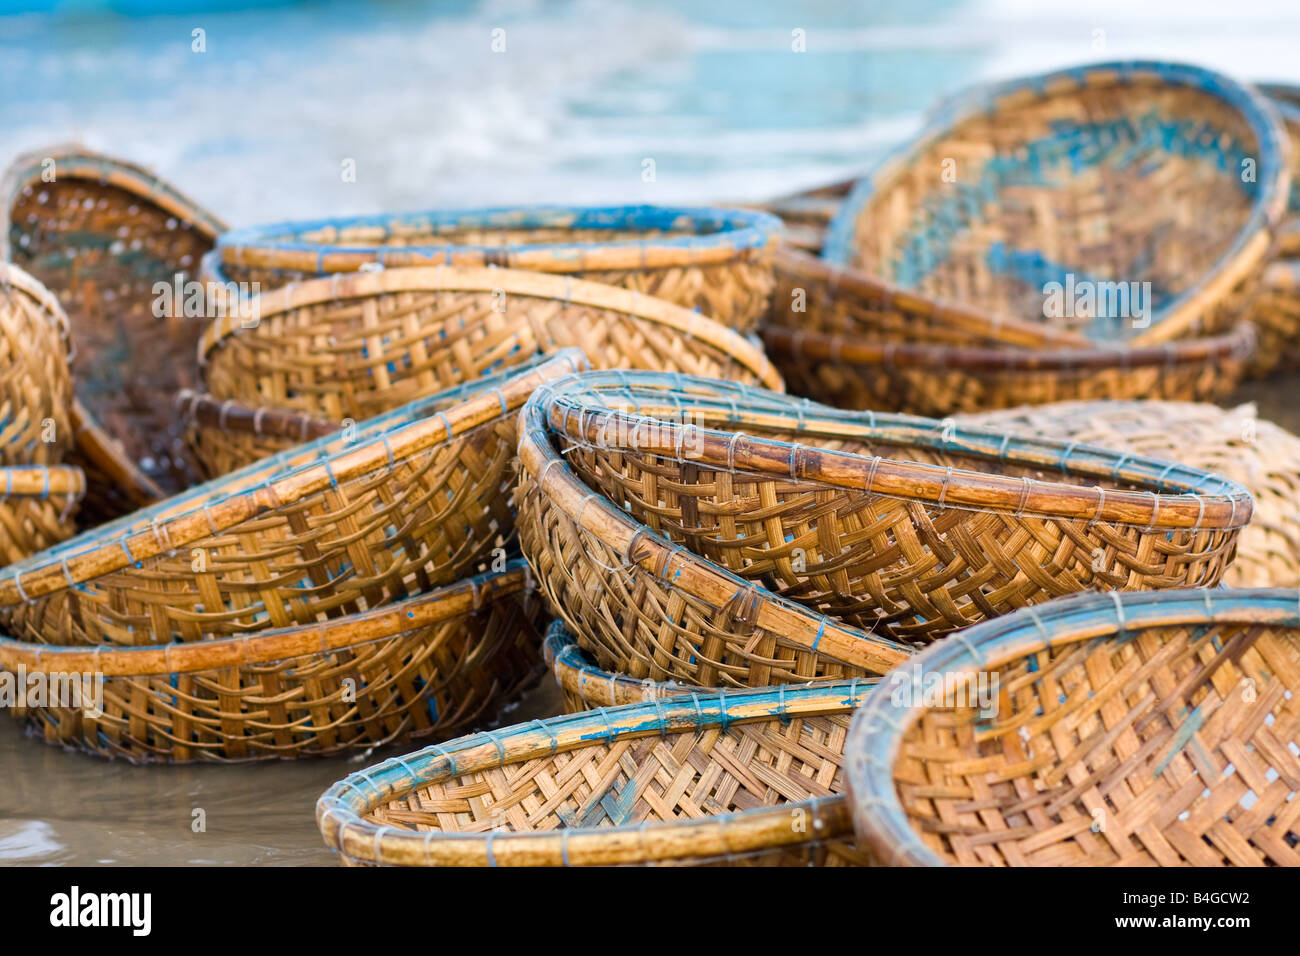 Bamboo Basket For Fish Trap In Asia Stock Photo, Picture and Royalty Free  Image. Image 26729217.